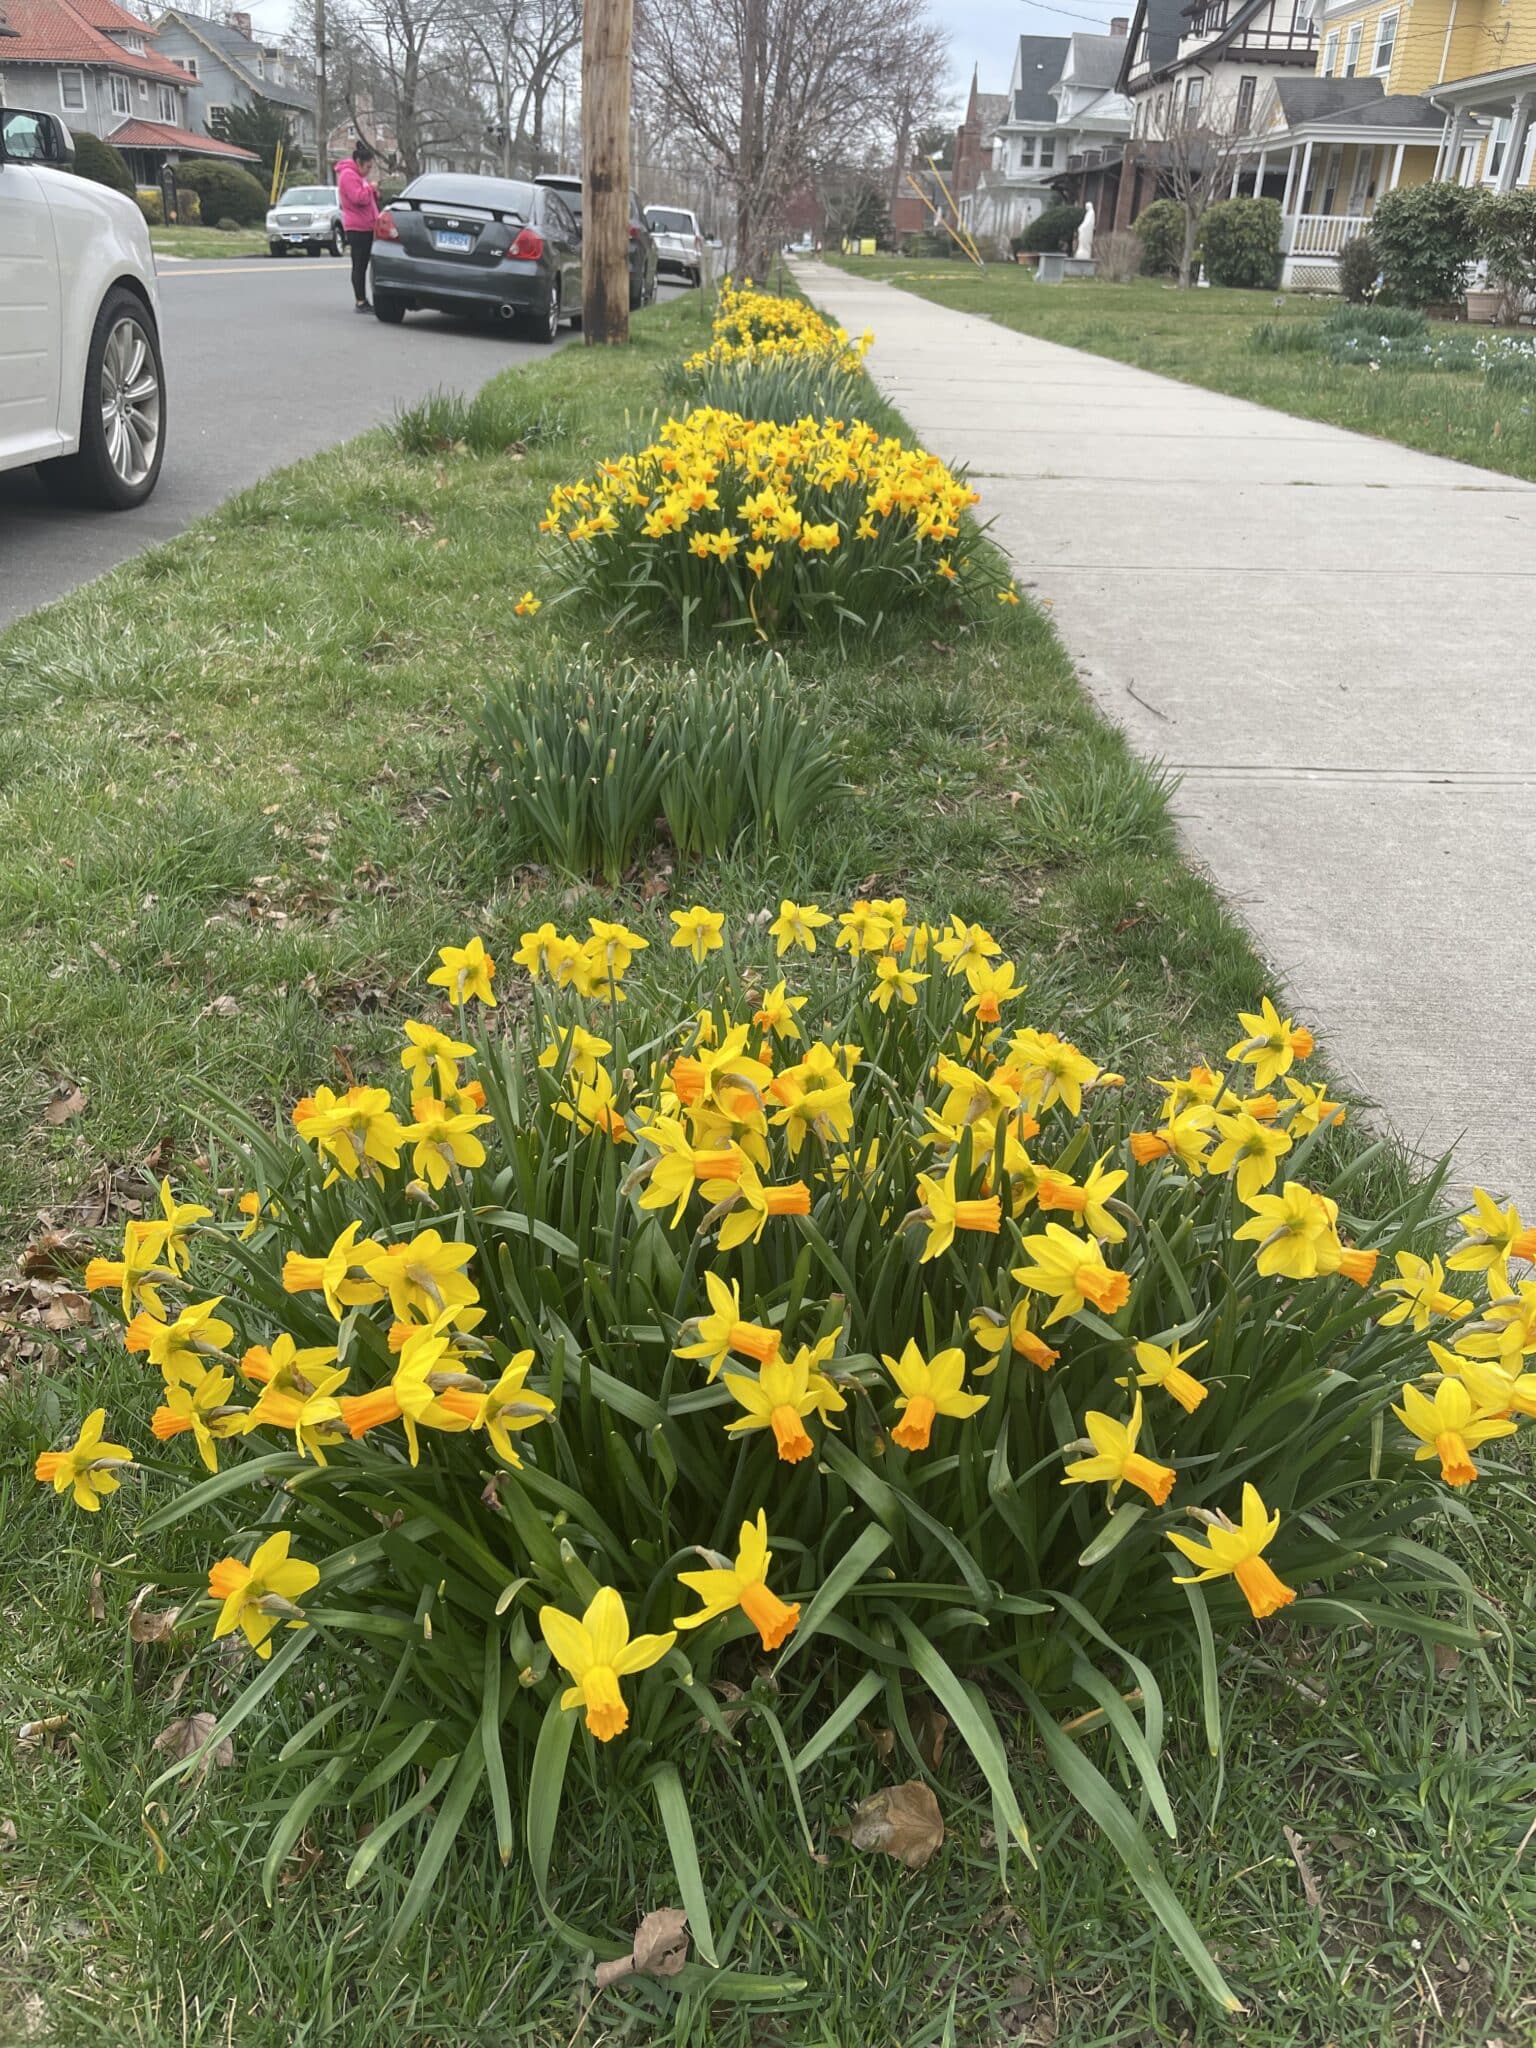 How to Plant in a Street Lawn